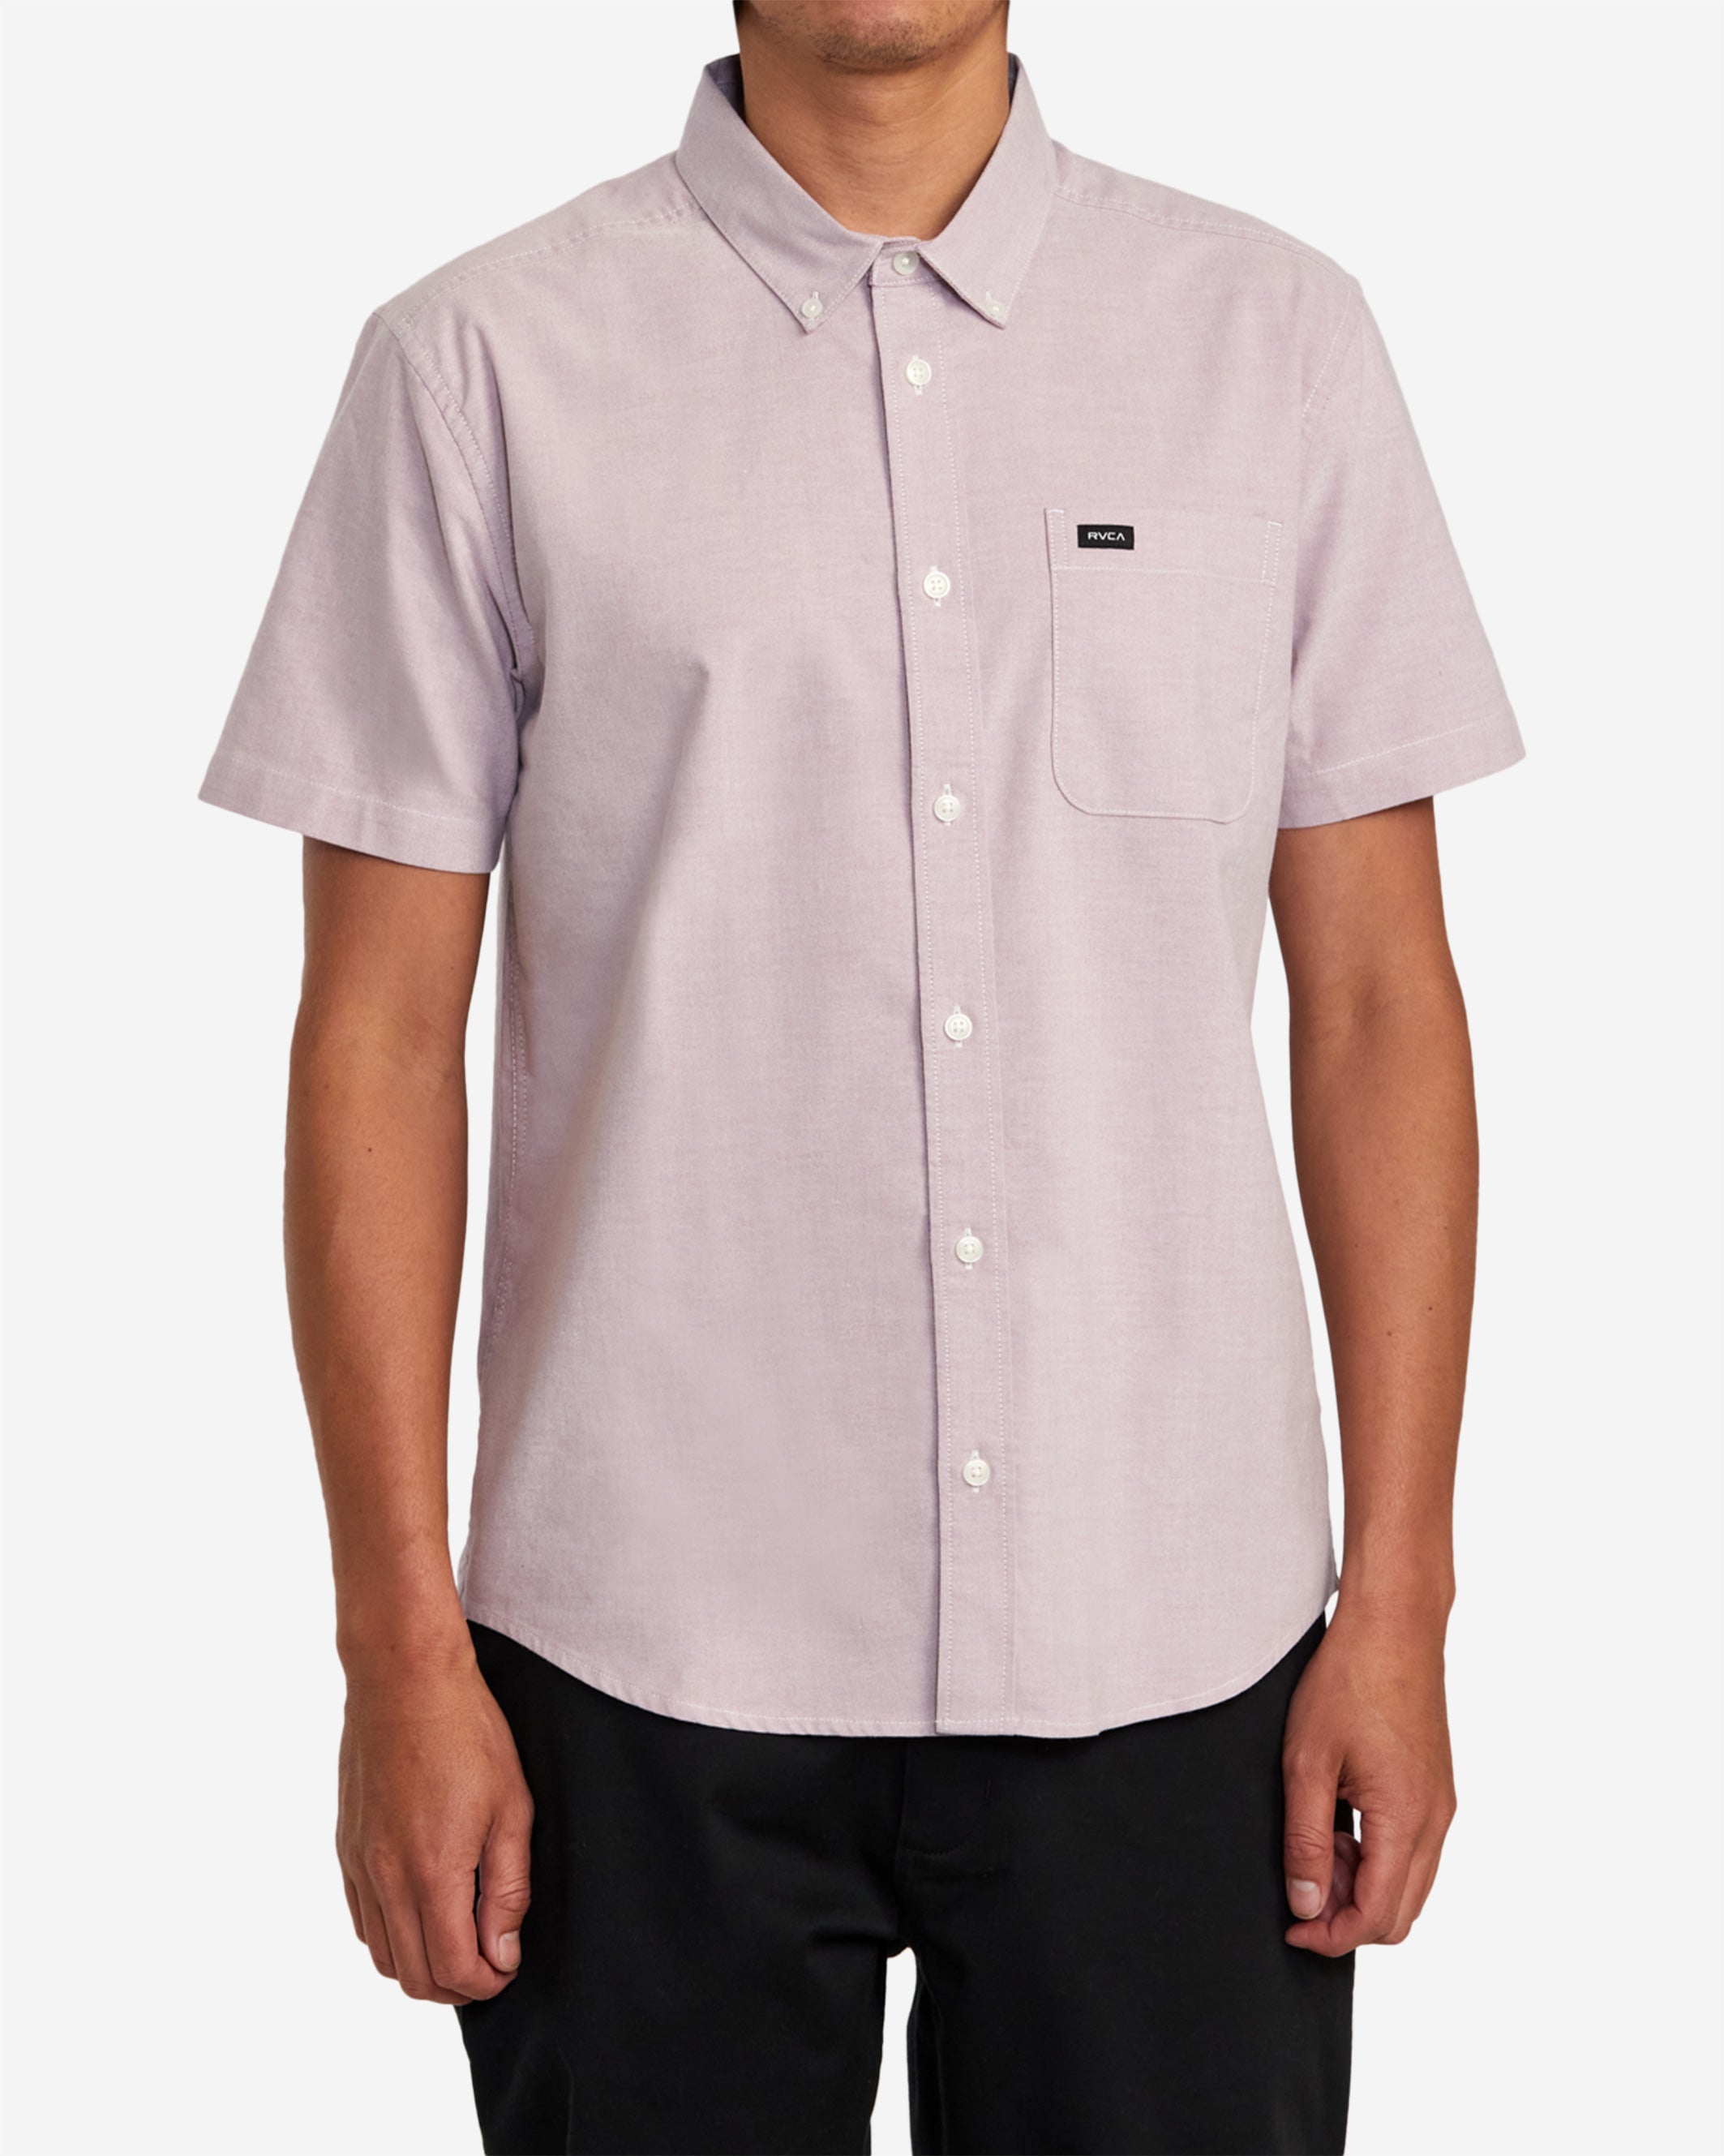 The RVCA That'll Do Stretch Short Sleeve Shirt combines heritage style and modern comfort in one. Made from soft stretch oxford, this button-down shirt features a traditional collar, short sleeves, scalloped hem, chest pocket and woven logo branding.